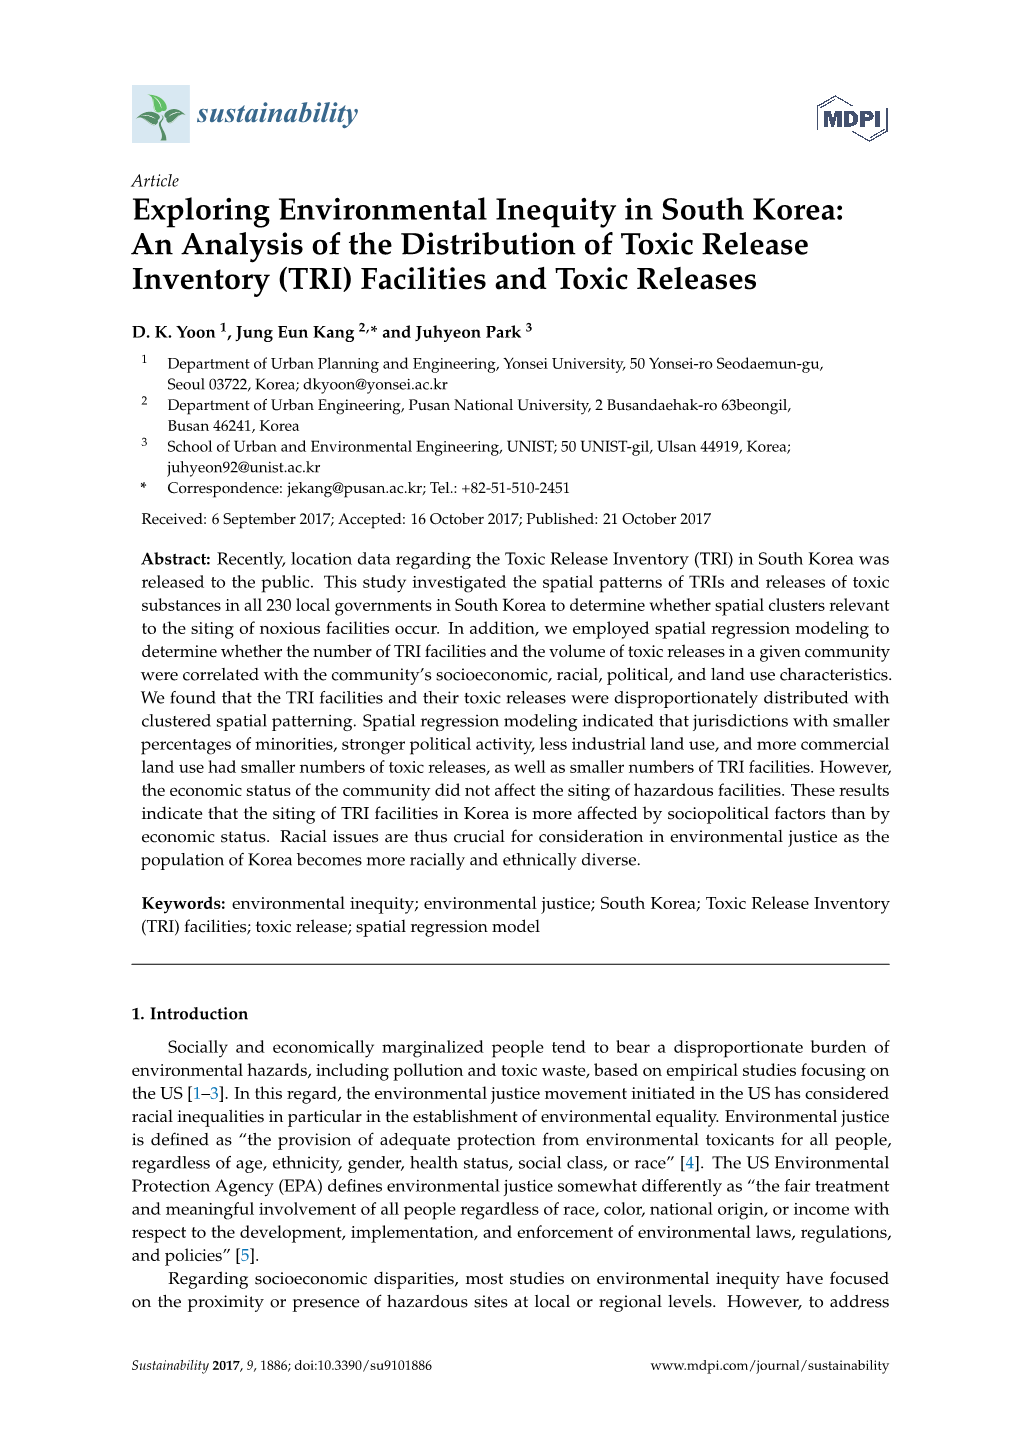 Exploring Environmental Inequity in South Korea: an Analysis of the Distribution of Toxic Release Inventory (TRI) Facilities and Toxic Releases